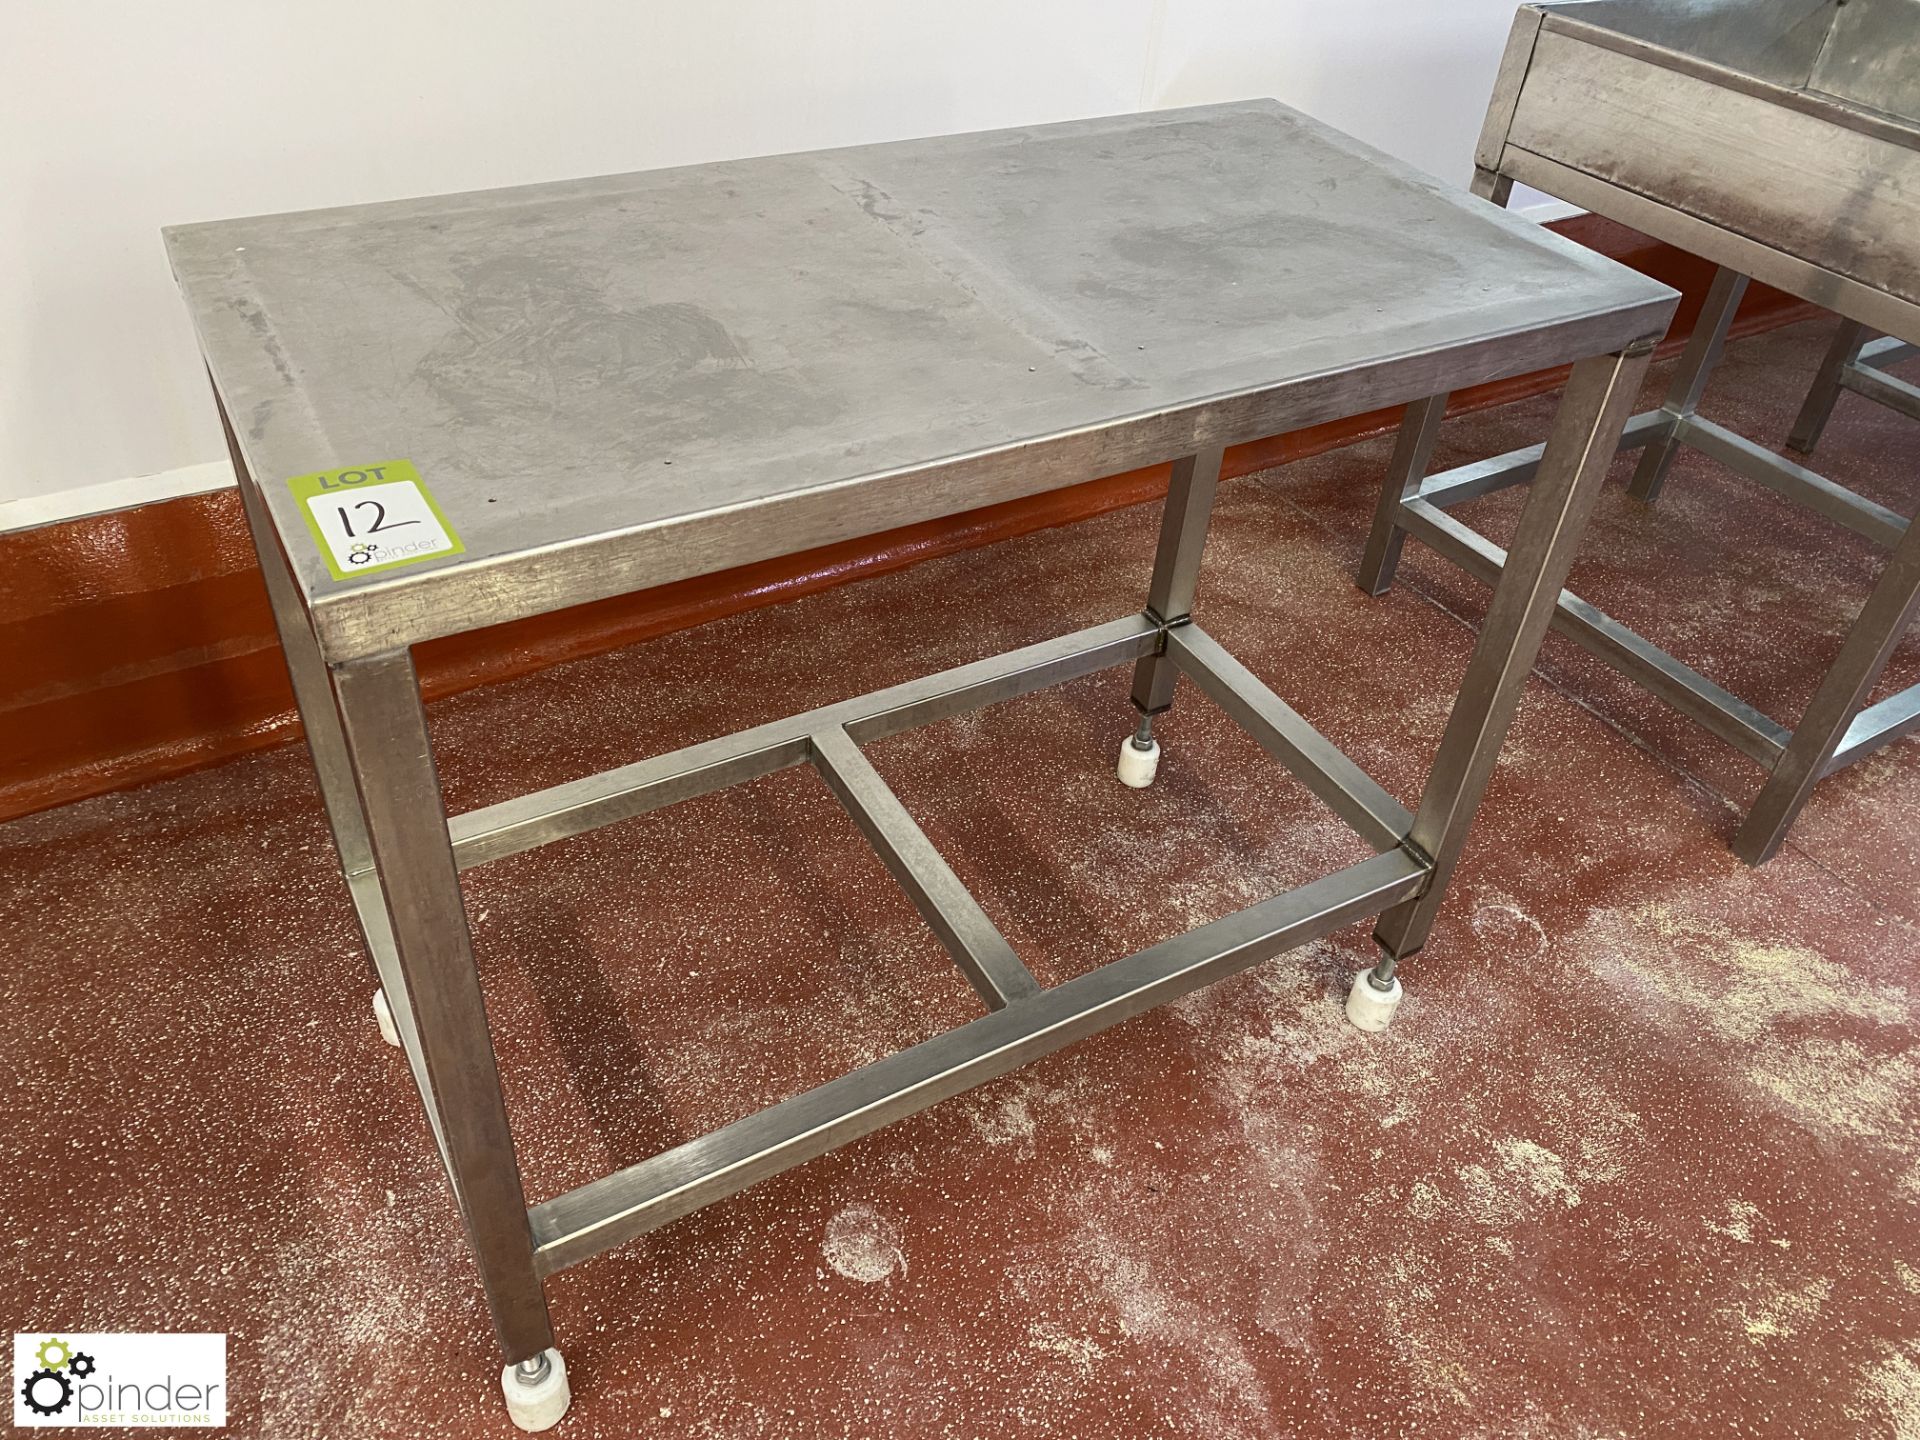 Stainless steel Preparation Table, 1000mm x 500mm x 875mm (Lift Out Fee: £10 plus VAT) - Image 2 of 3